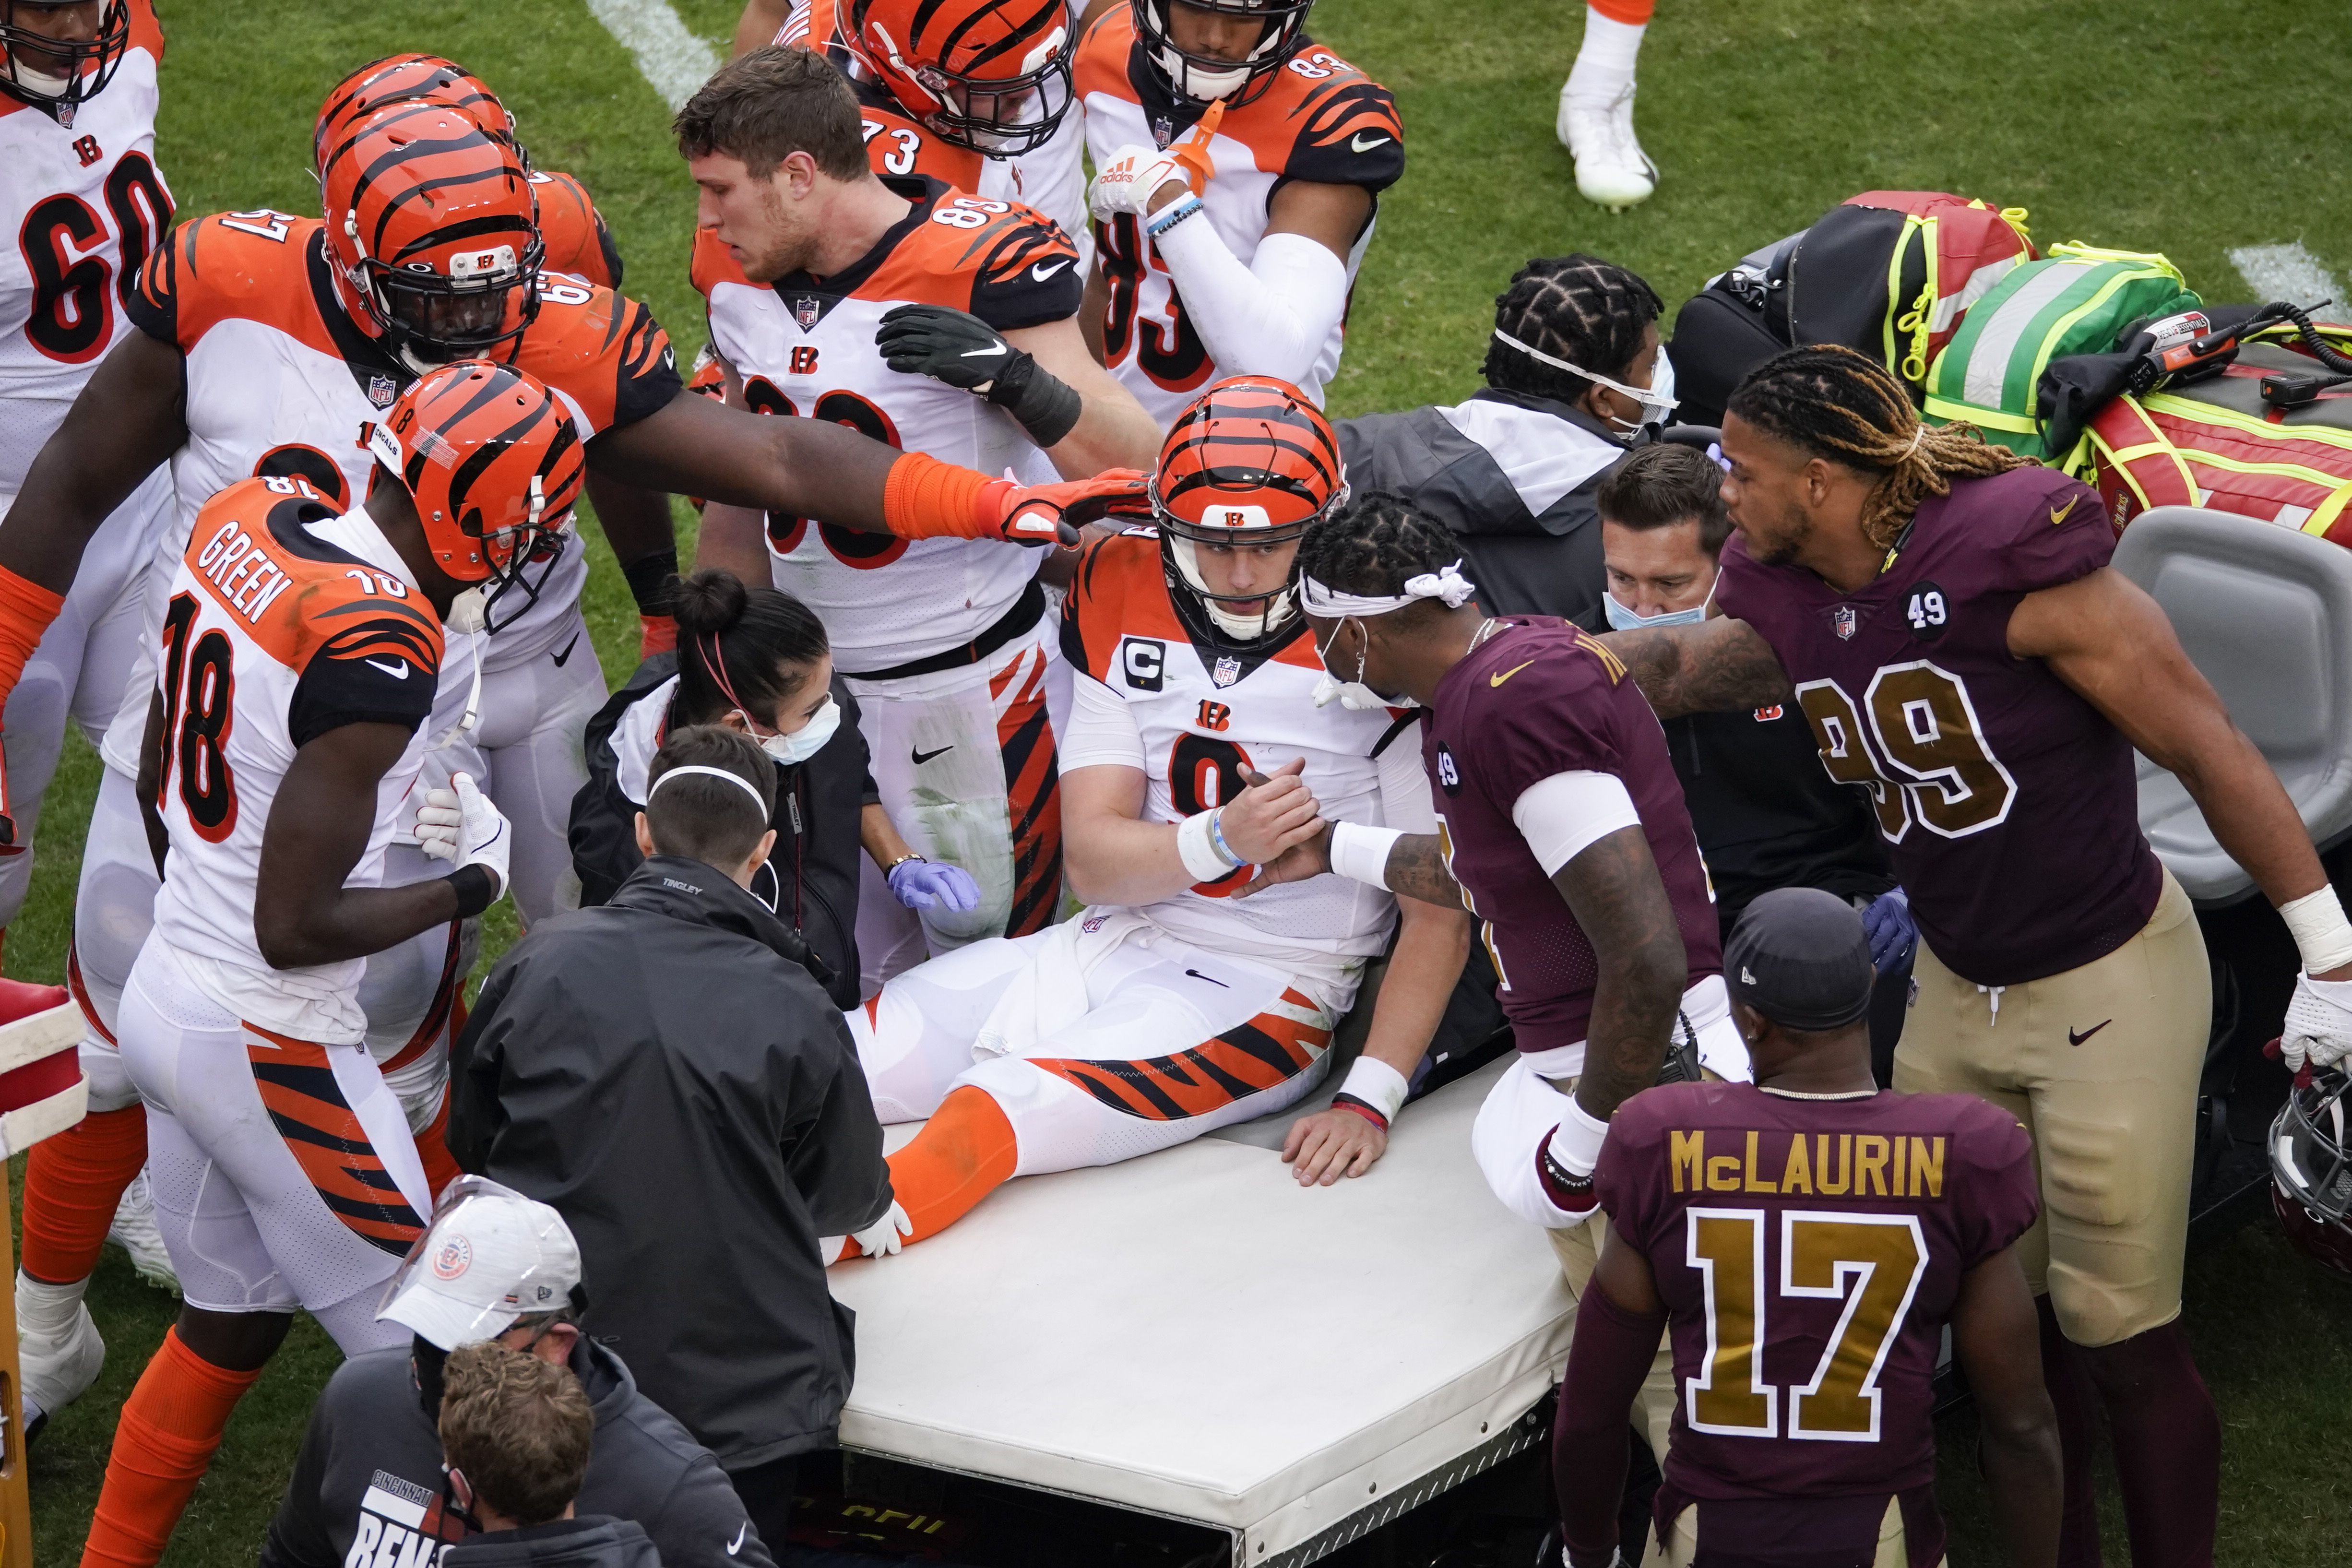 Joe Burrow Injury Update: What's the Next Positive Step in Bengals